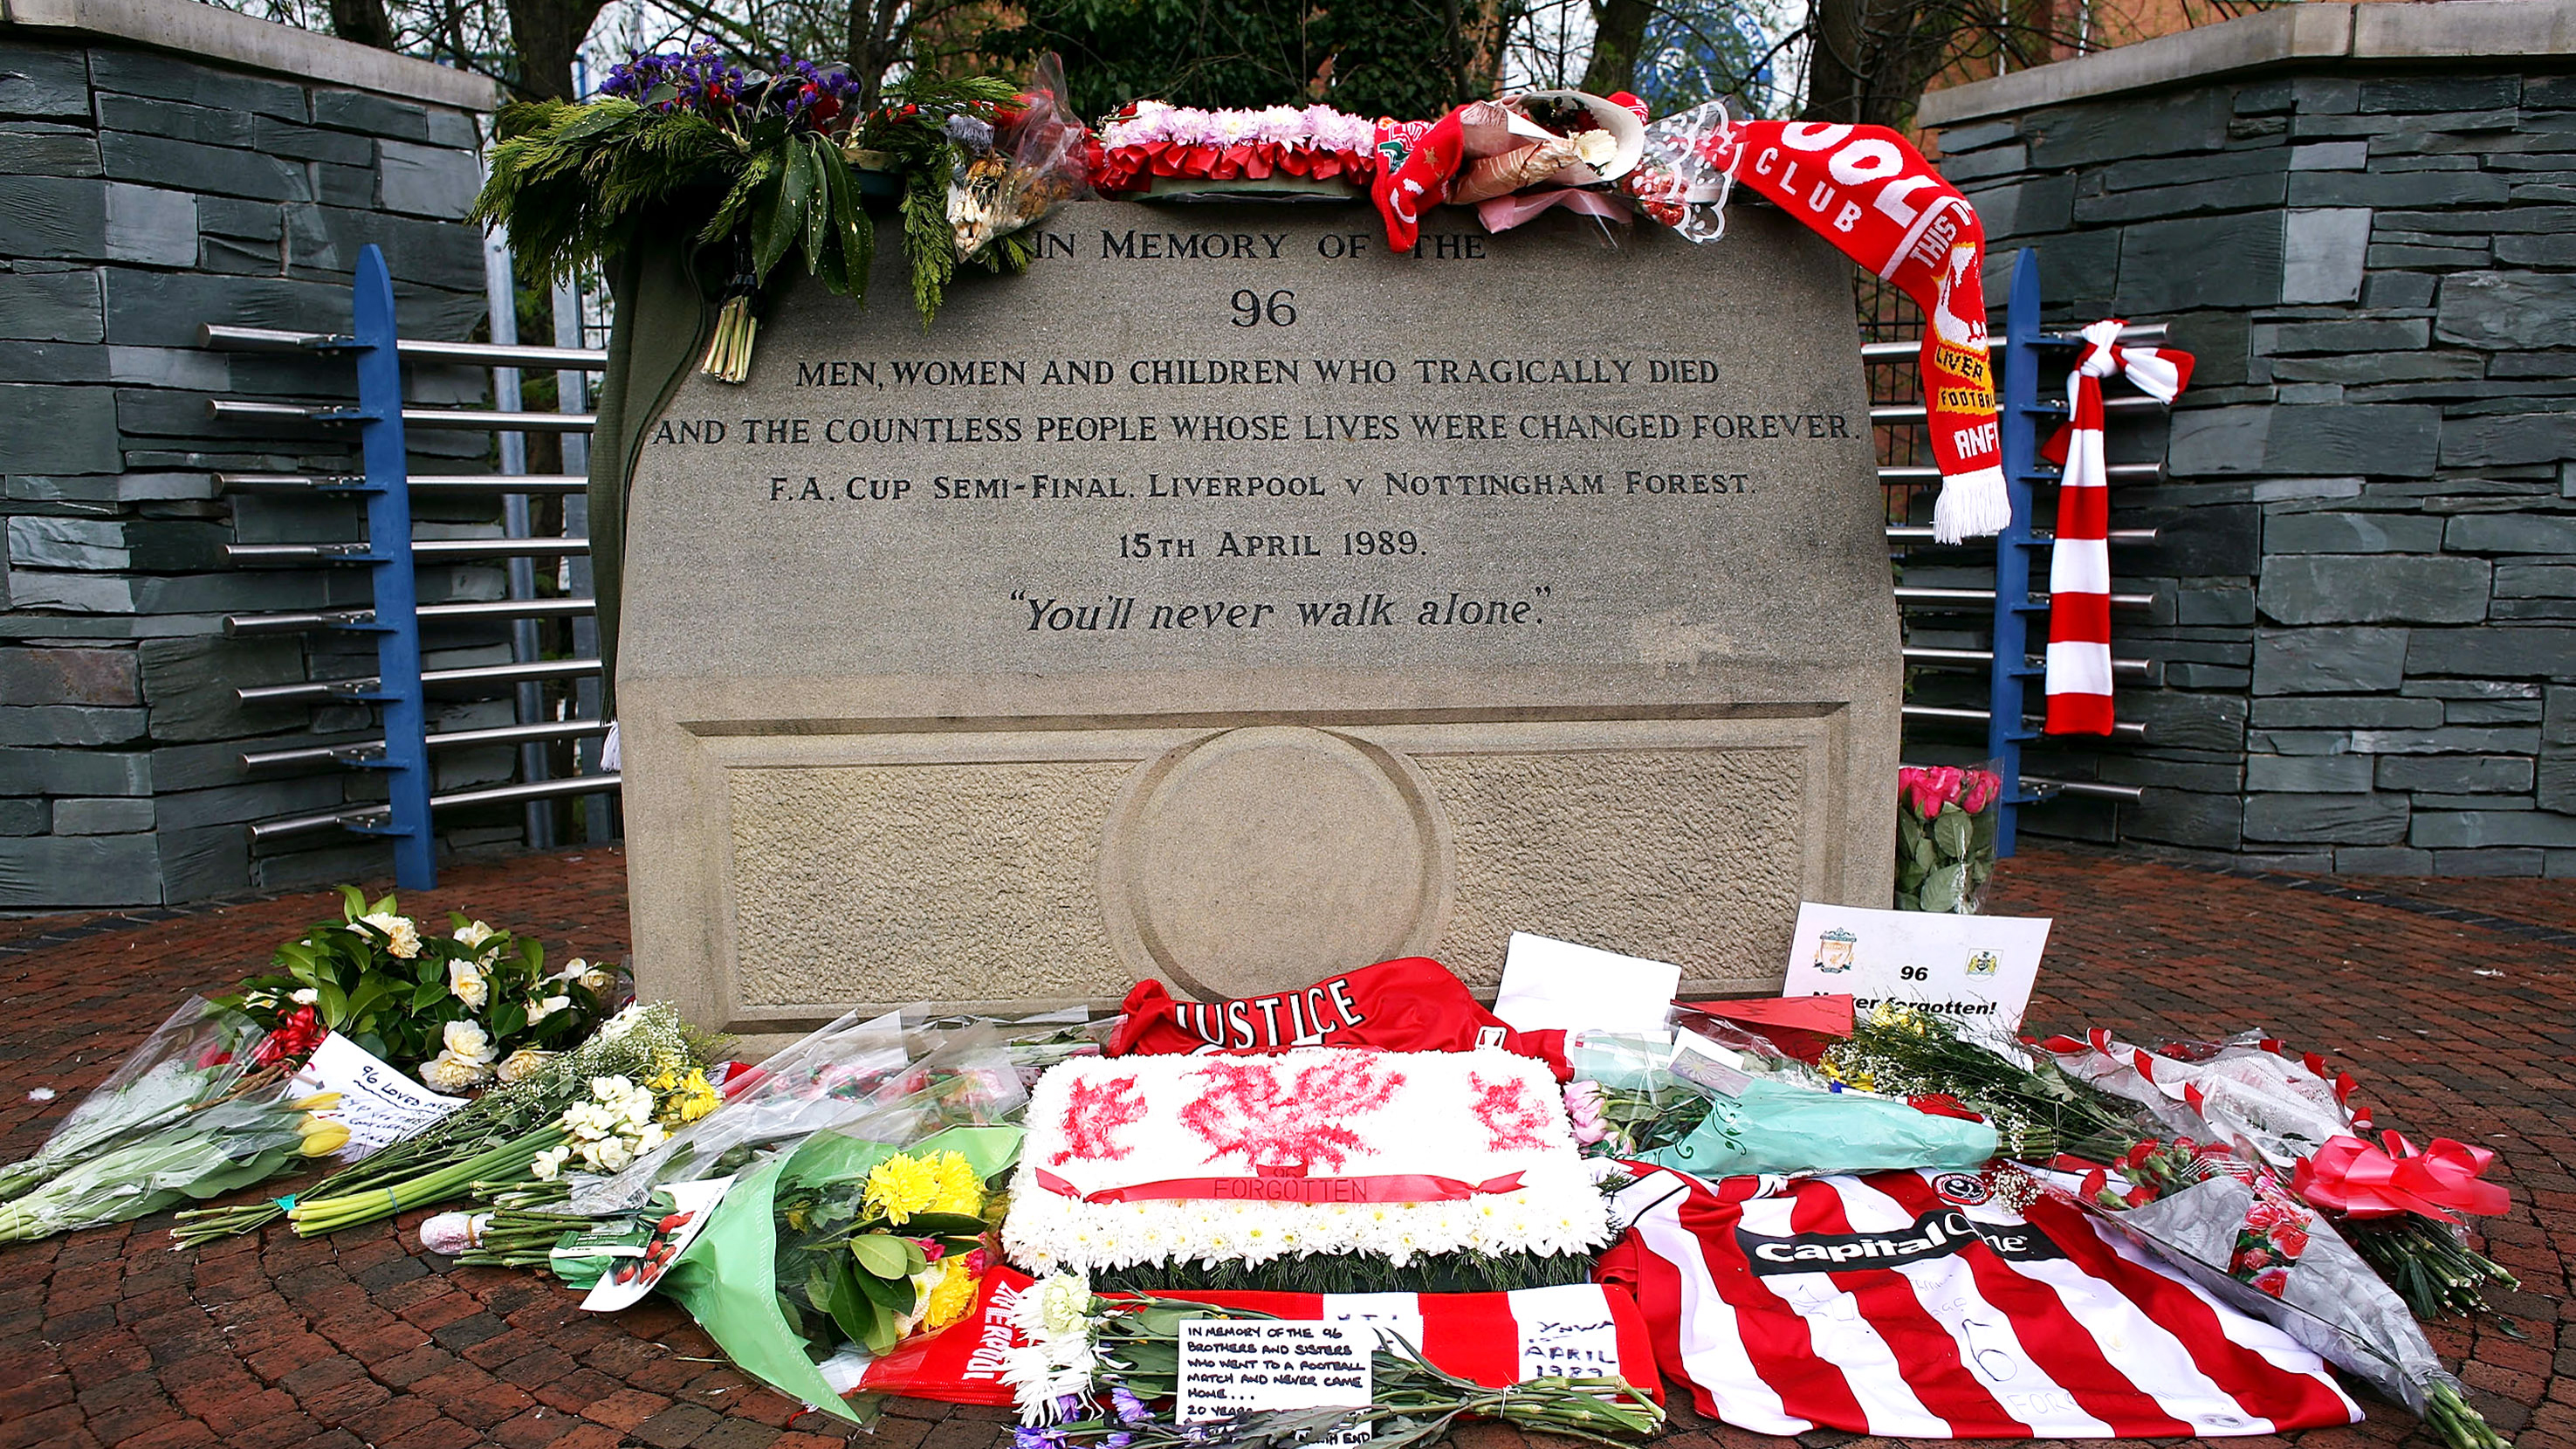 Tributes are laid at the Hillsborough Stadium ahead of the 20th anniversary (G)